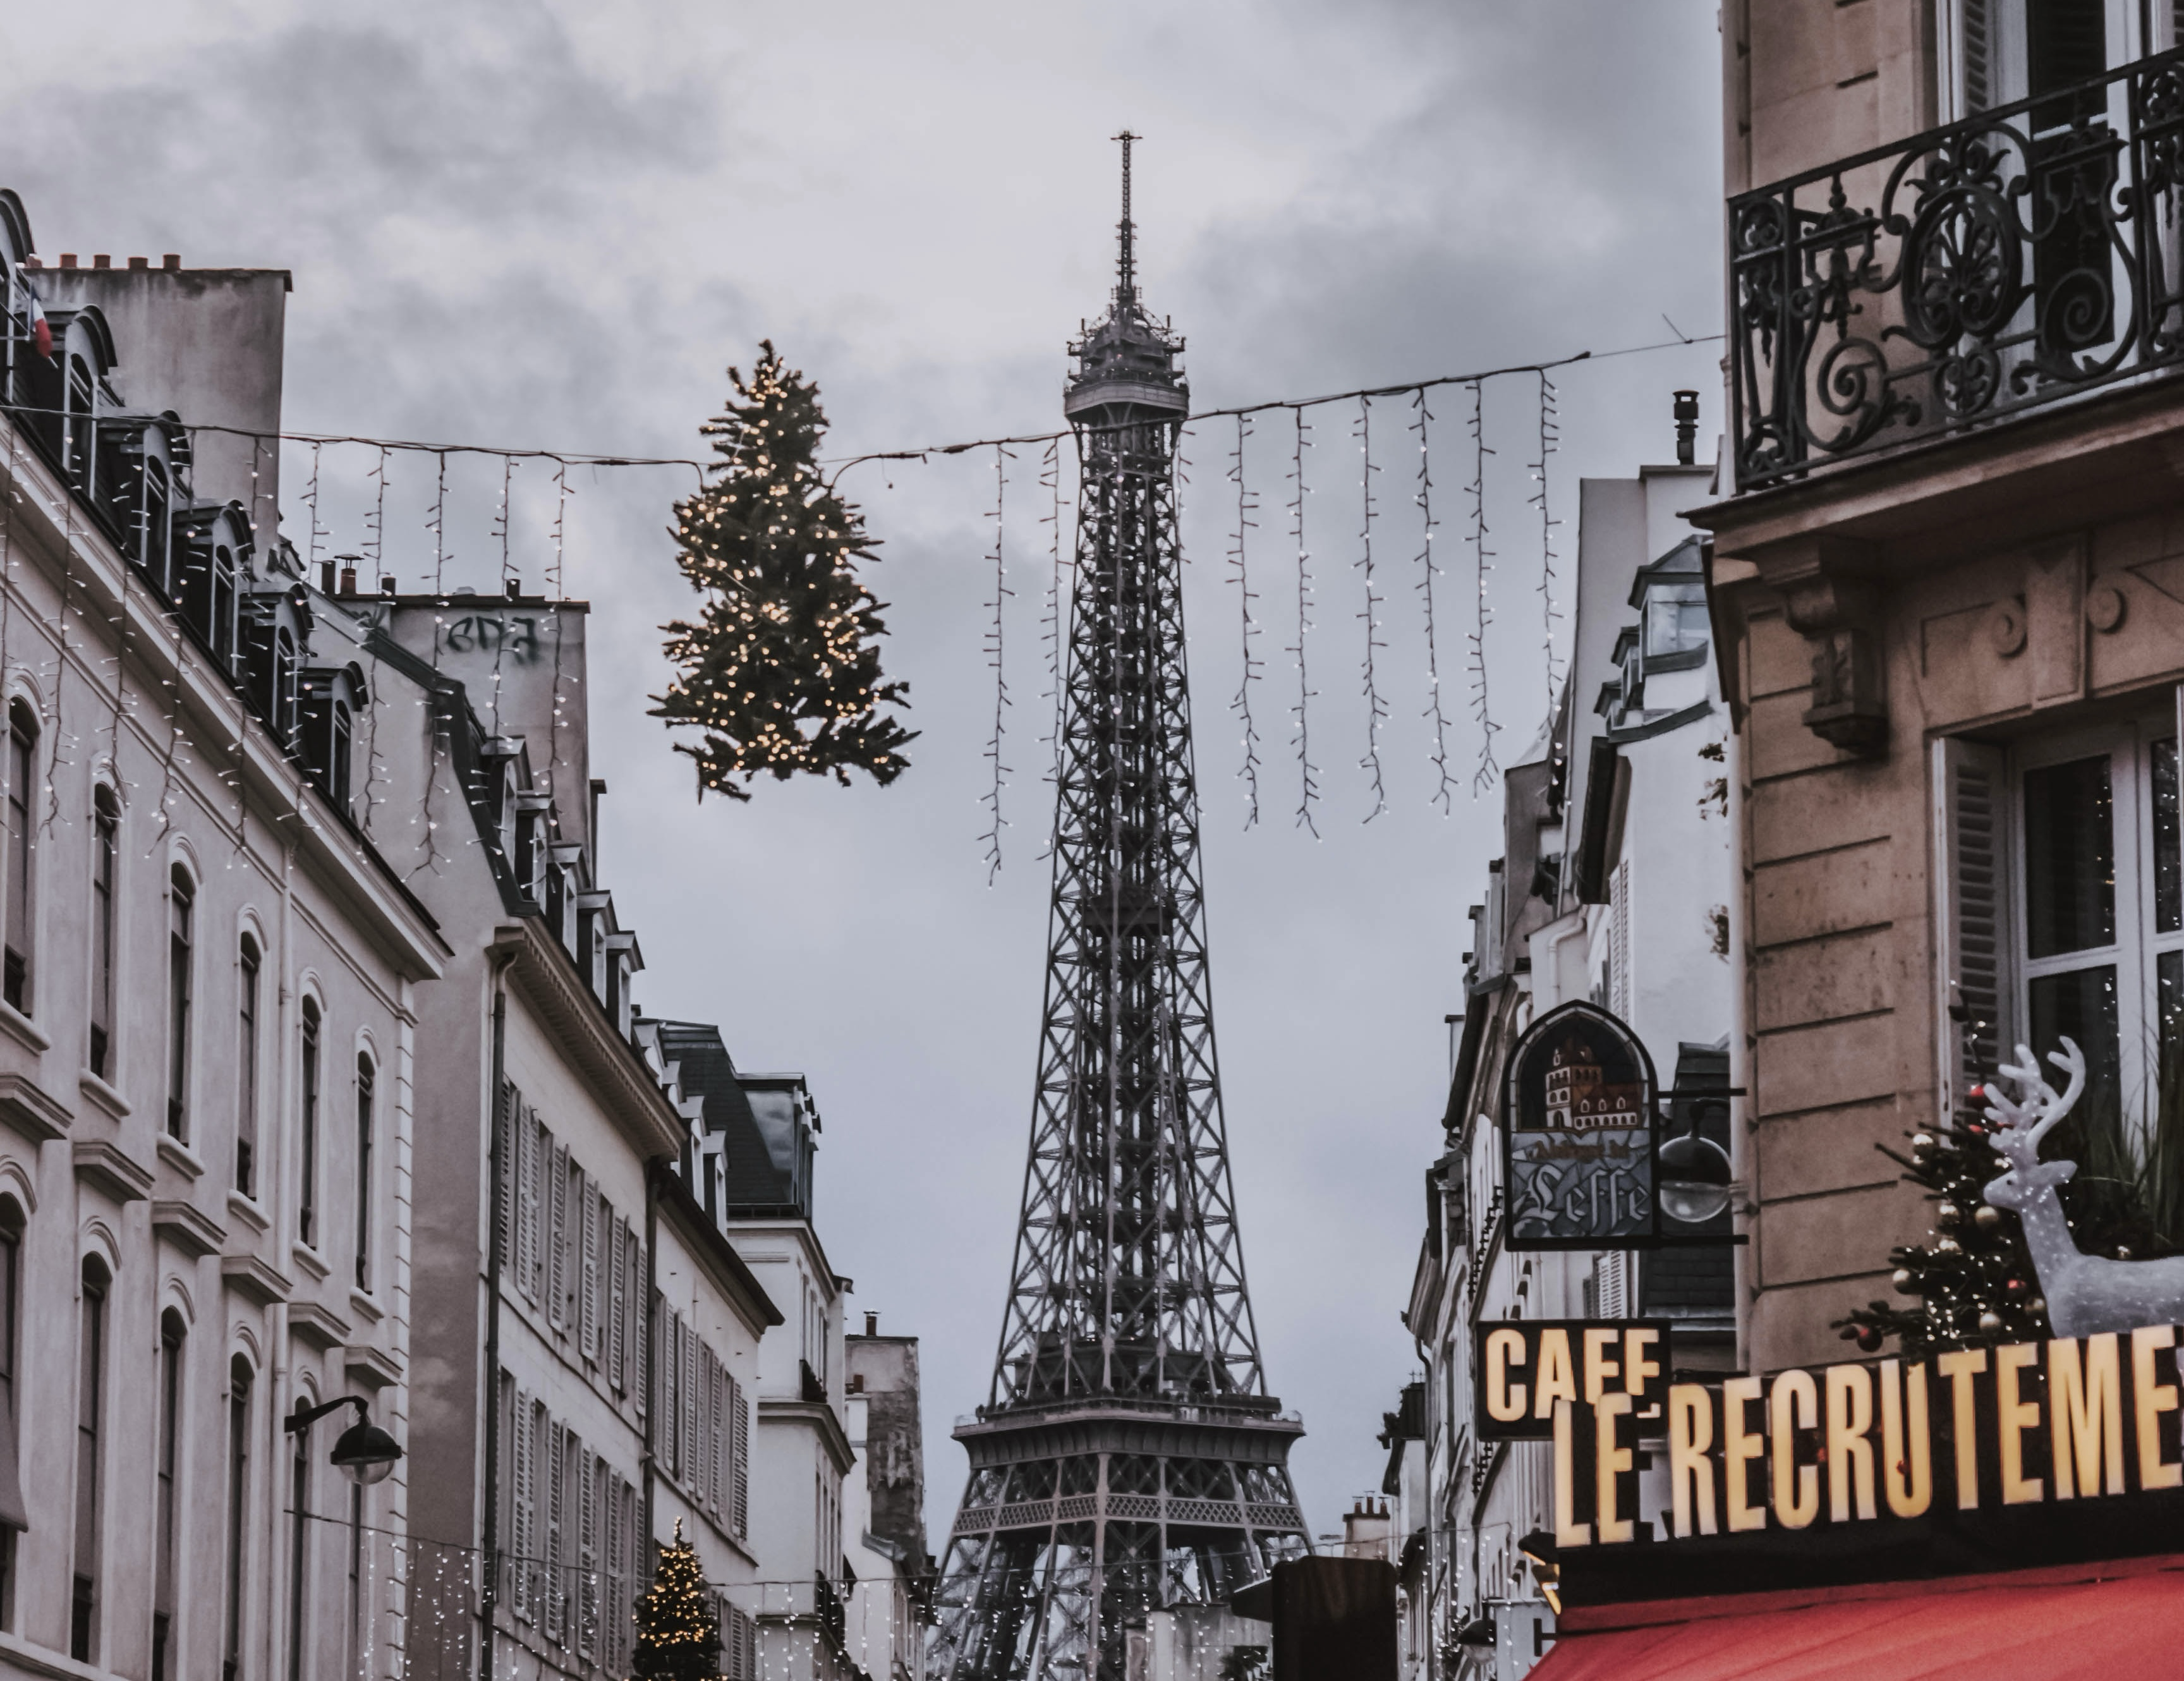 Visit the romantic city with the most stunning sights and activities, like the market, during the holidays. France is the perfect holiday destination. 
Pictured: France’s streets decorated with Christmas lights and trees hanging in front of the Eiffel Tower 